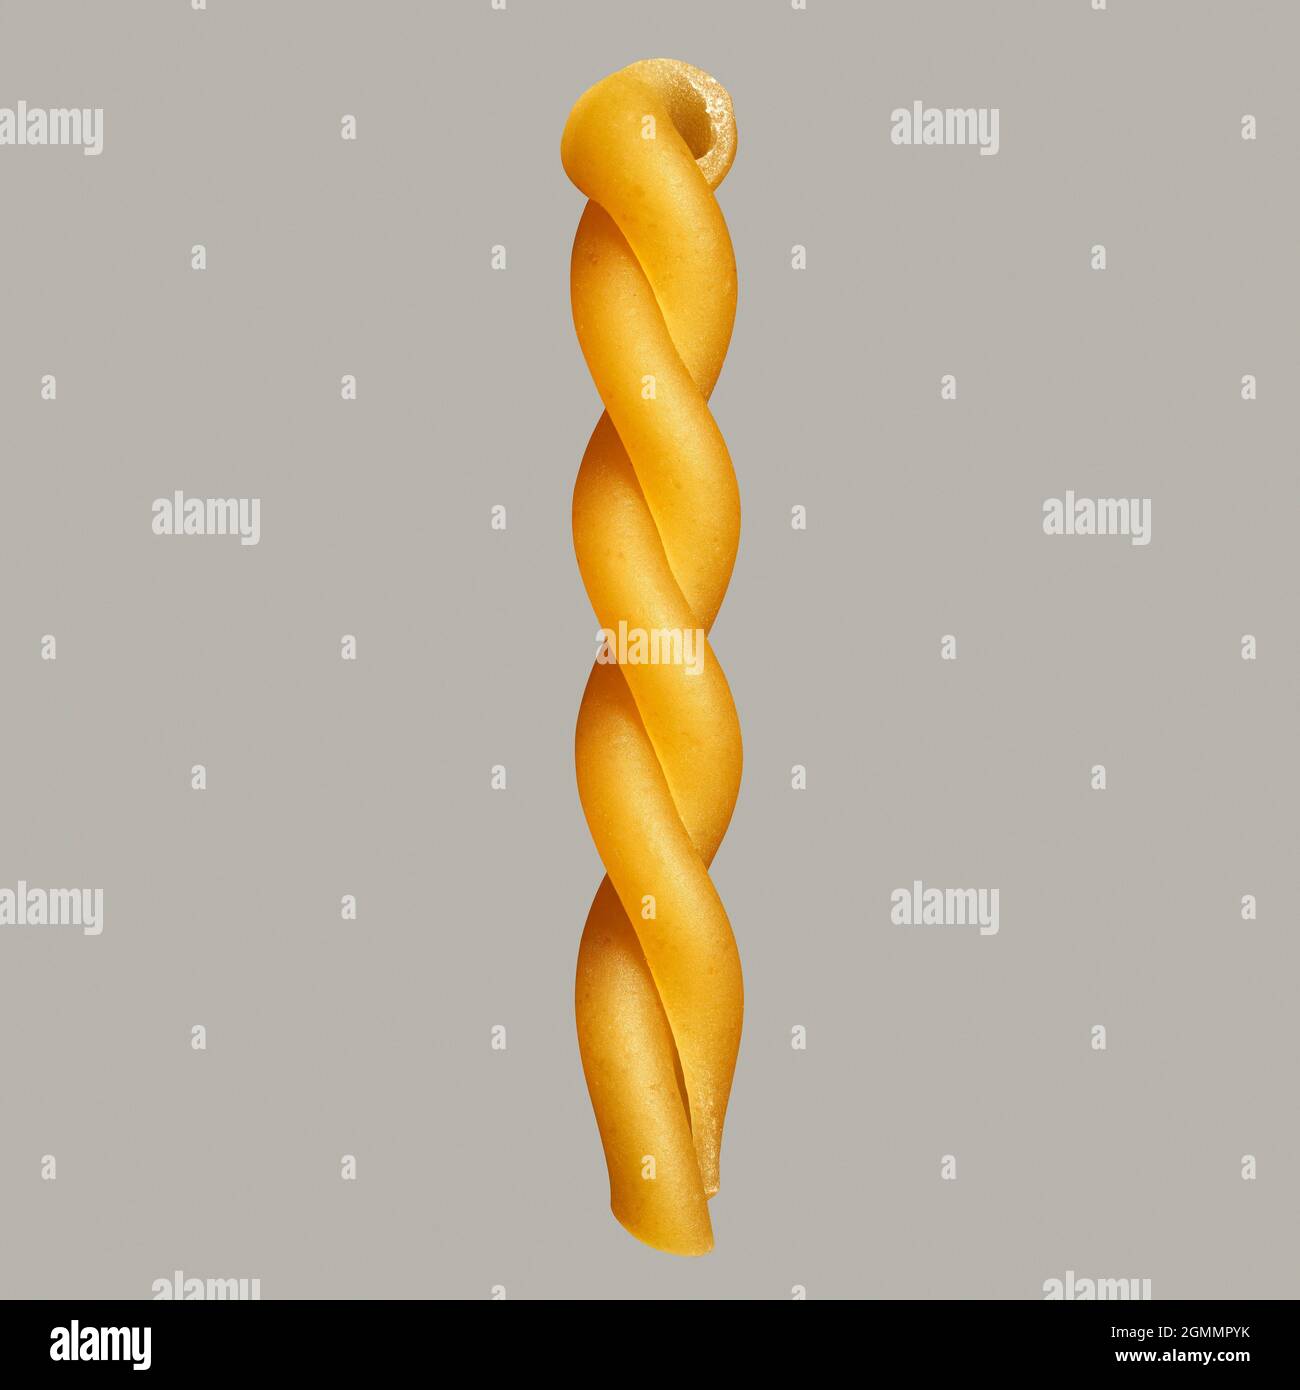 Close up uncooked gemelli pasta noodle on gray background Stock Photo